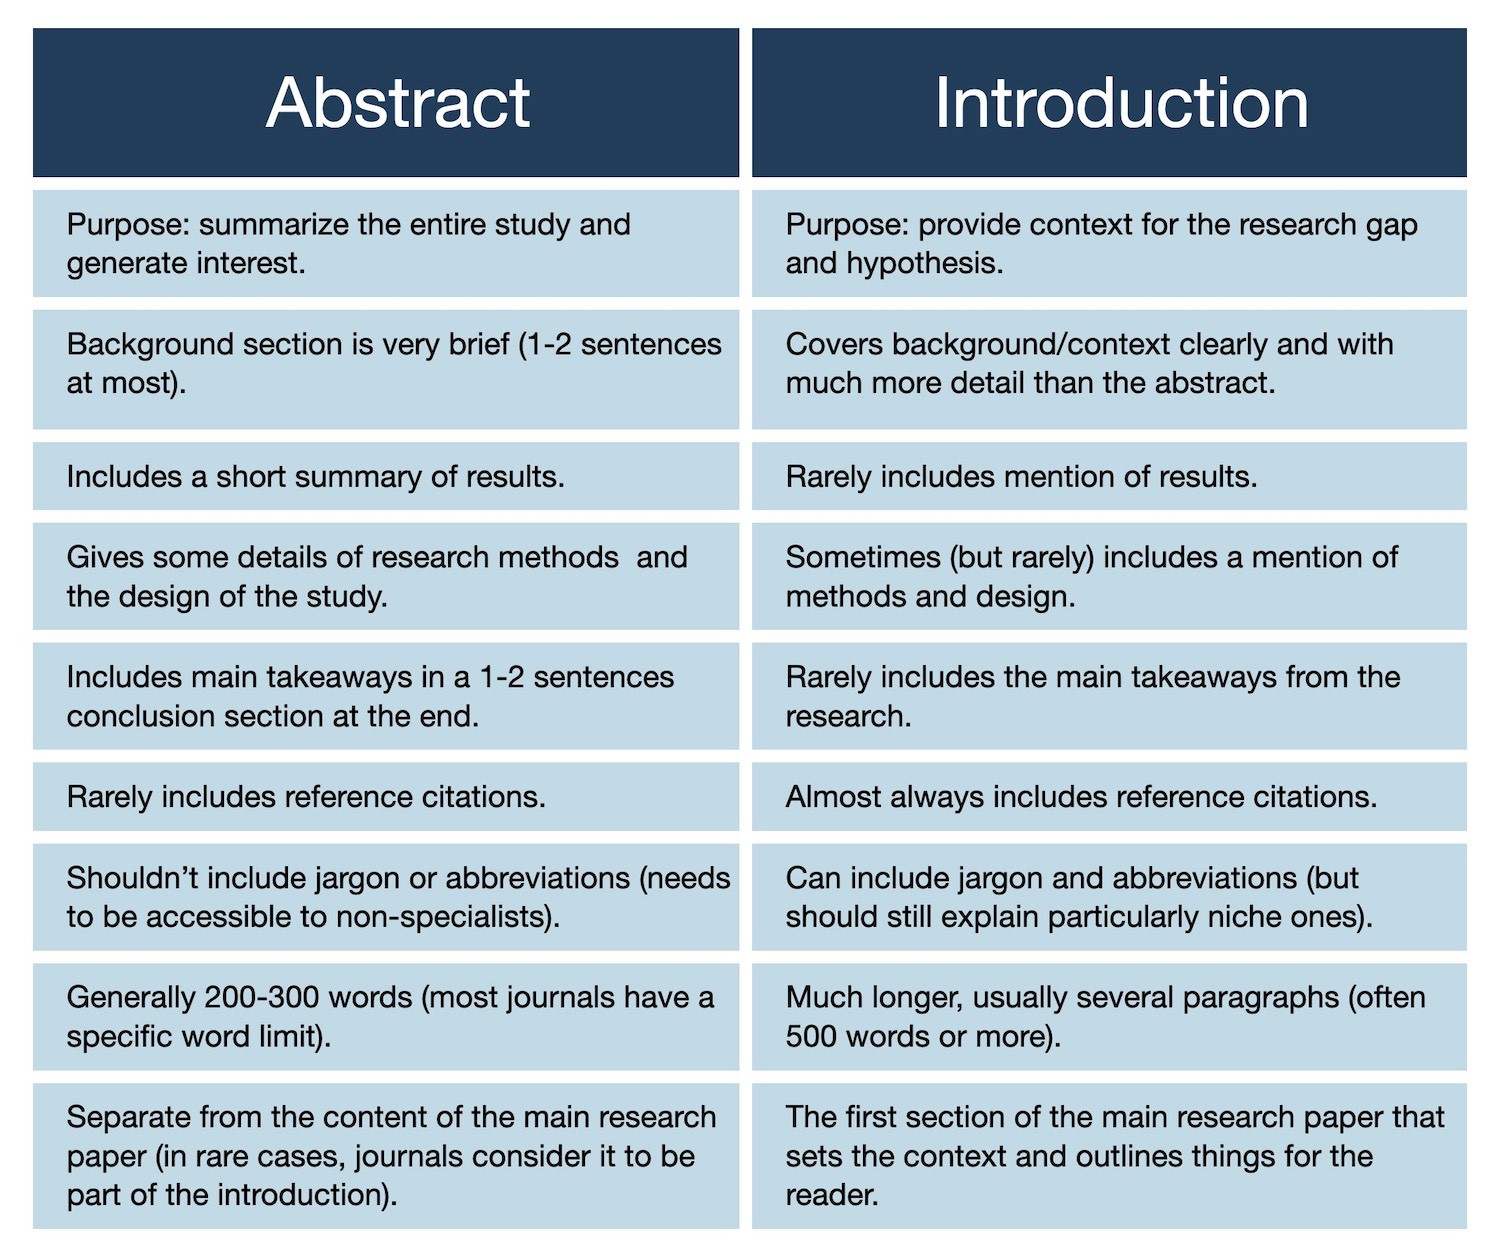 Comparison table between abstract and introduction